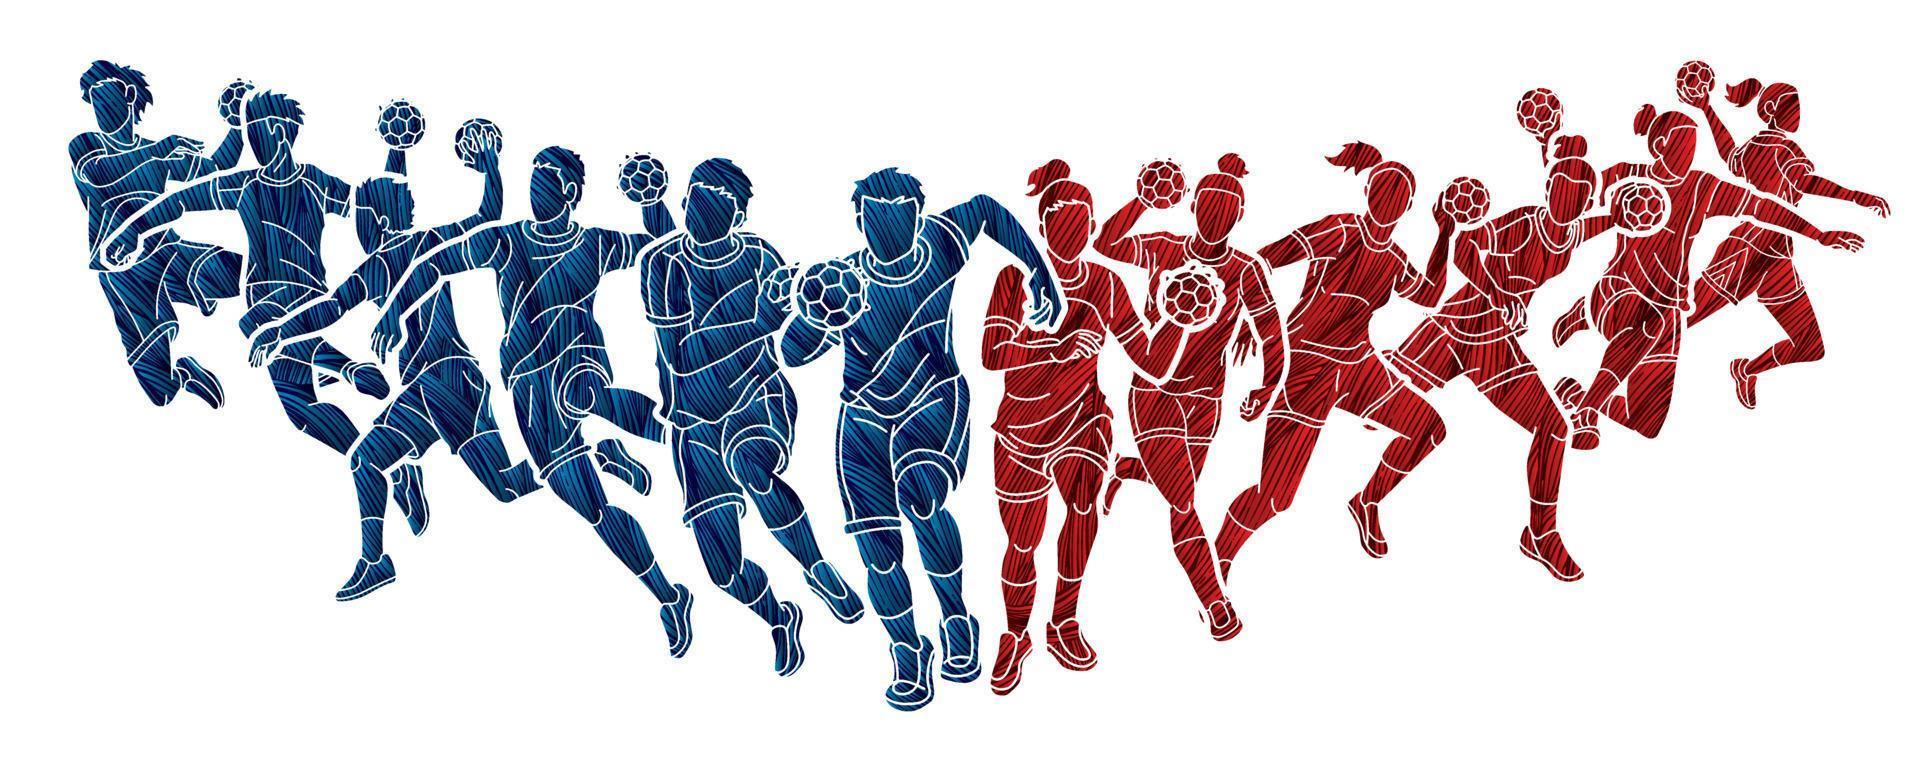 Group of Handball Players Male and Female Action vector